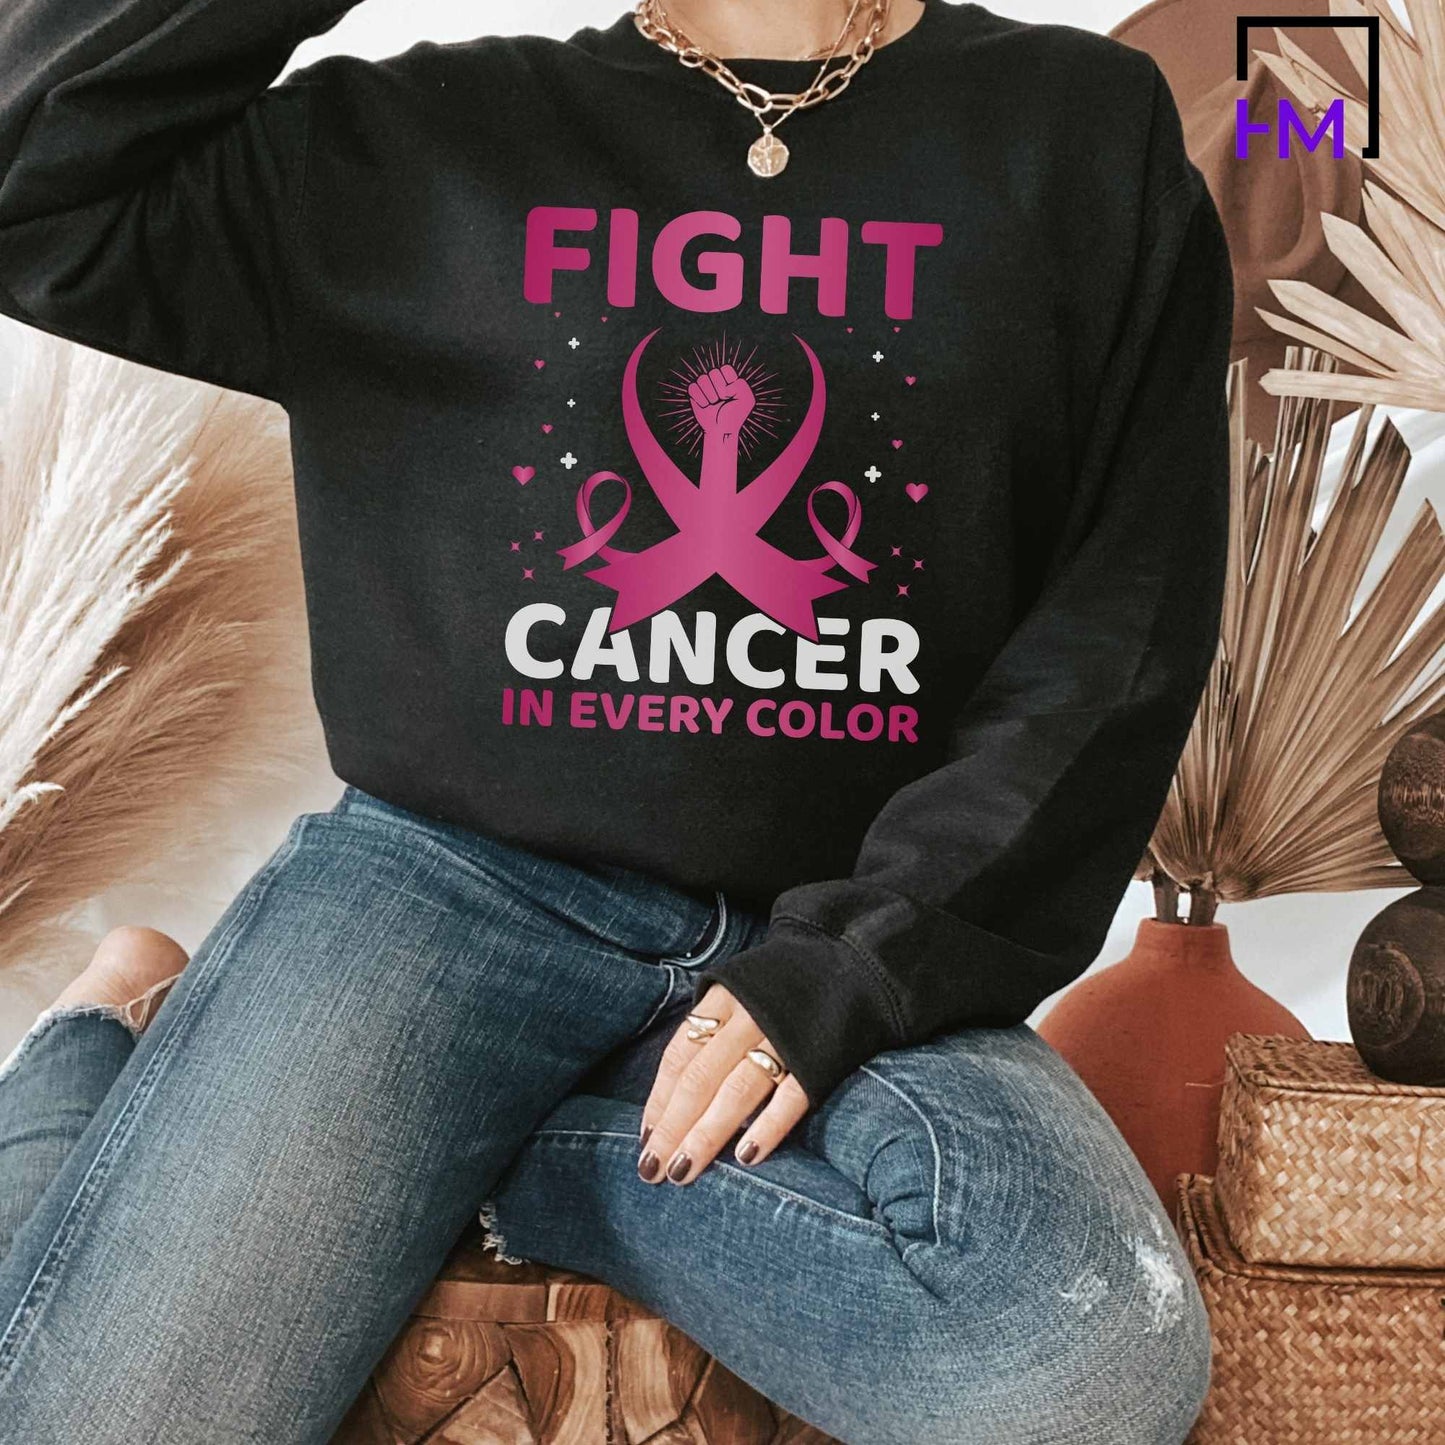 Fight Cancer in Every Color, World Cancer Day Shirt, Breast Cancer Shirt, Never Give Up, Cancer Survivor Gifts, Stronger than Cancer Sweatshirt, Pink Ribbon Hoodie HMDesignStudioUS